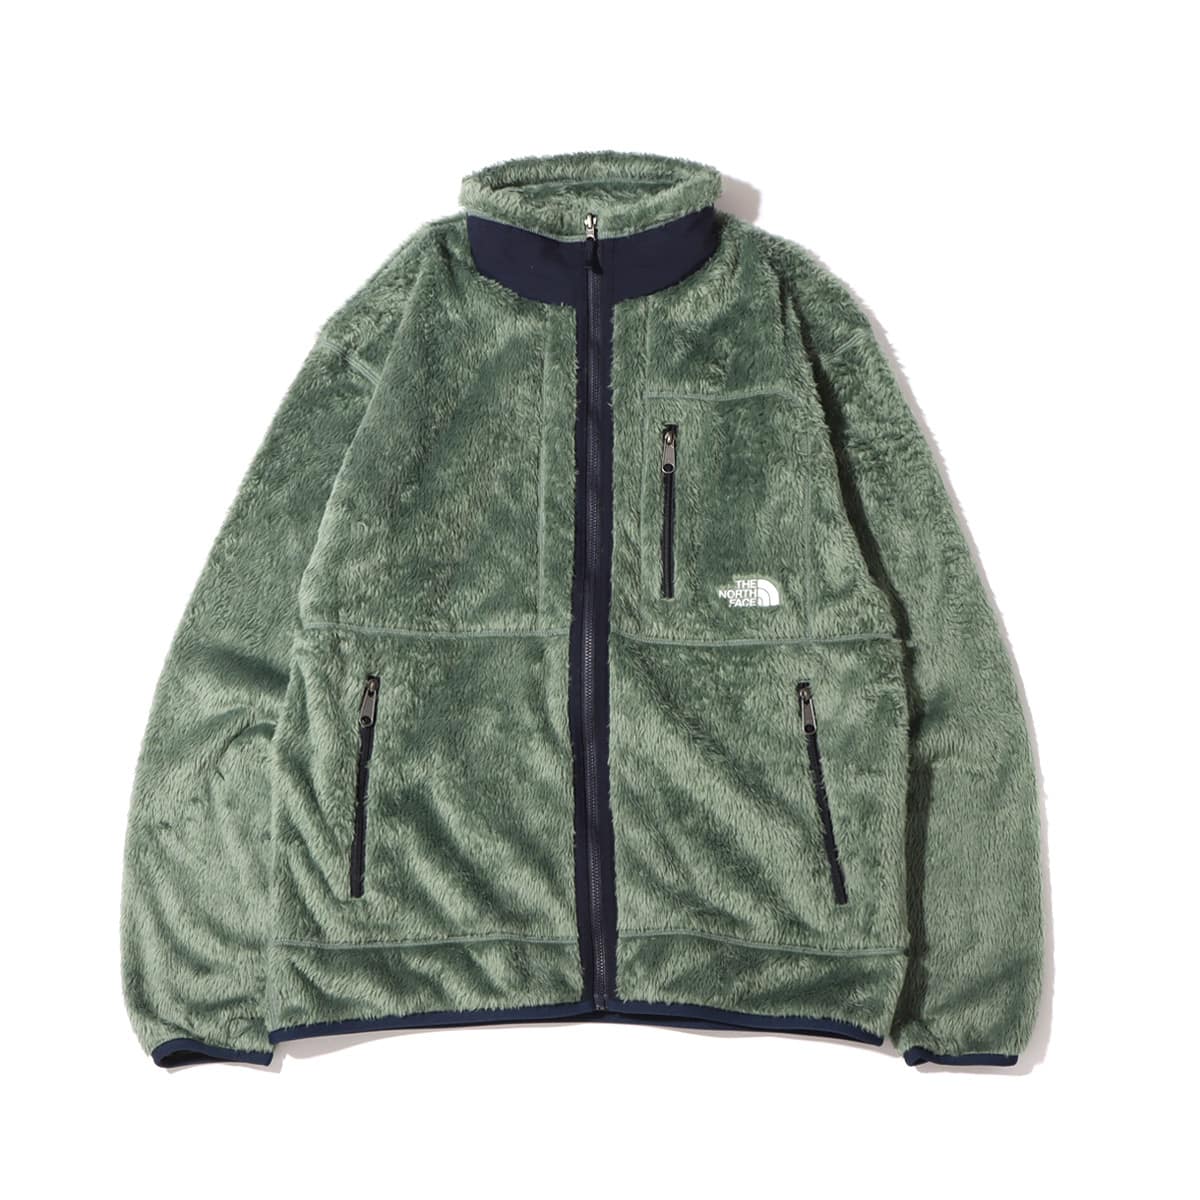 THE NORTH FACE ZI MAGNE EXTREME VERSA LOFT JACKET ローレルリース 